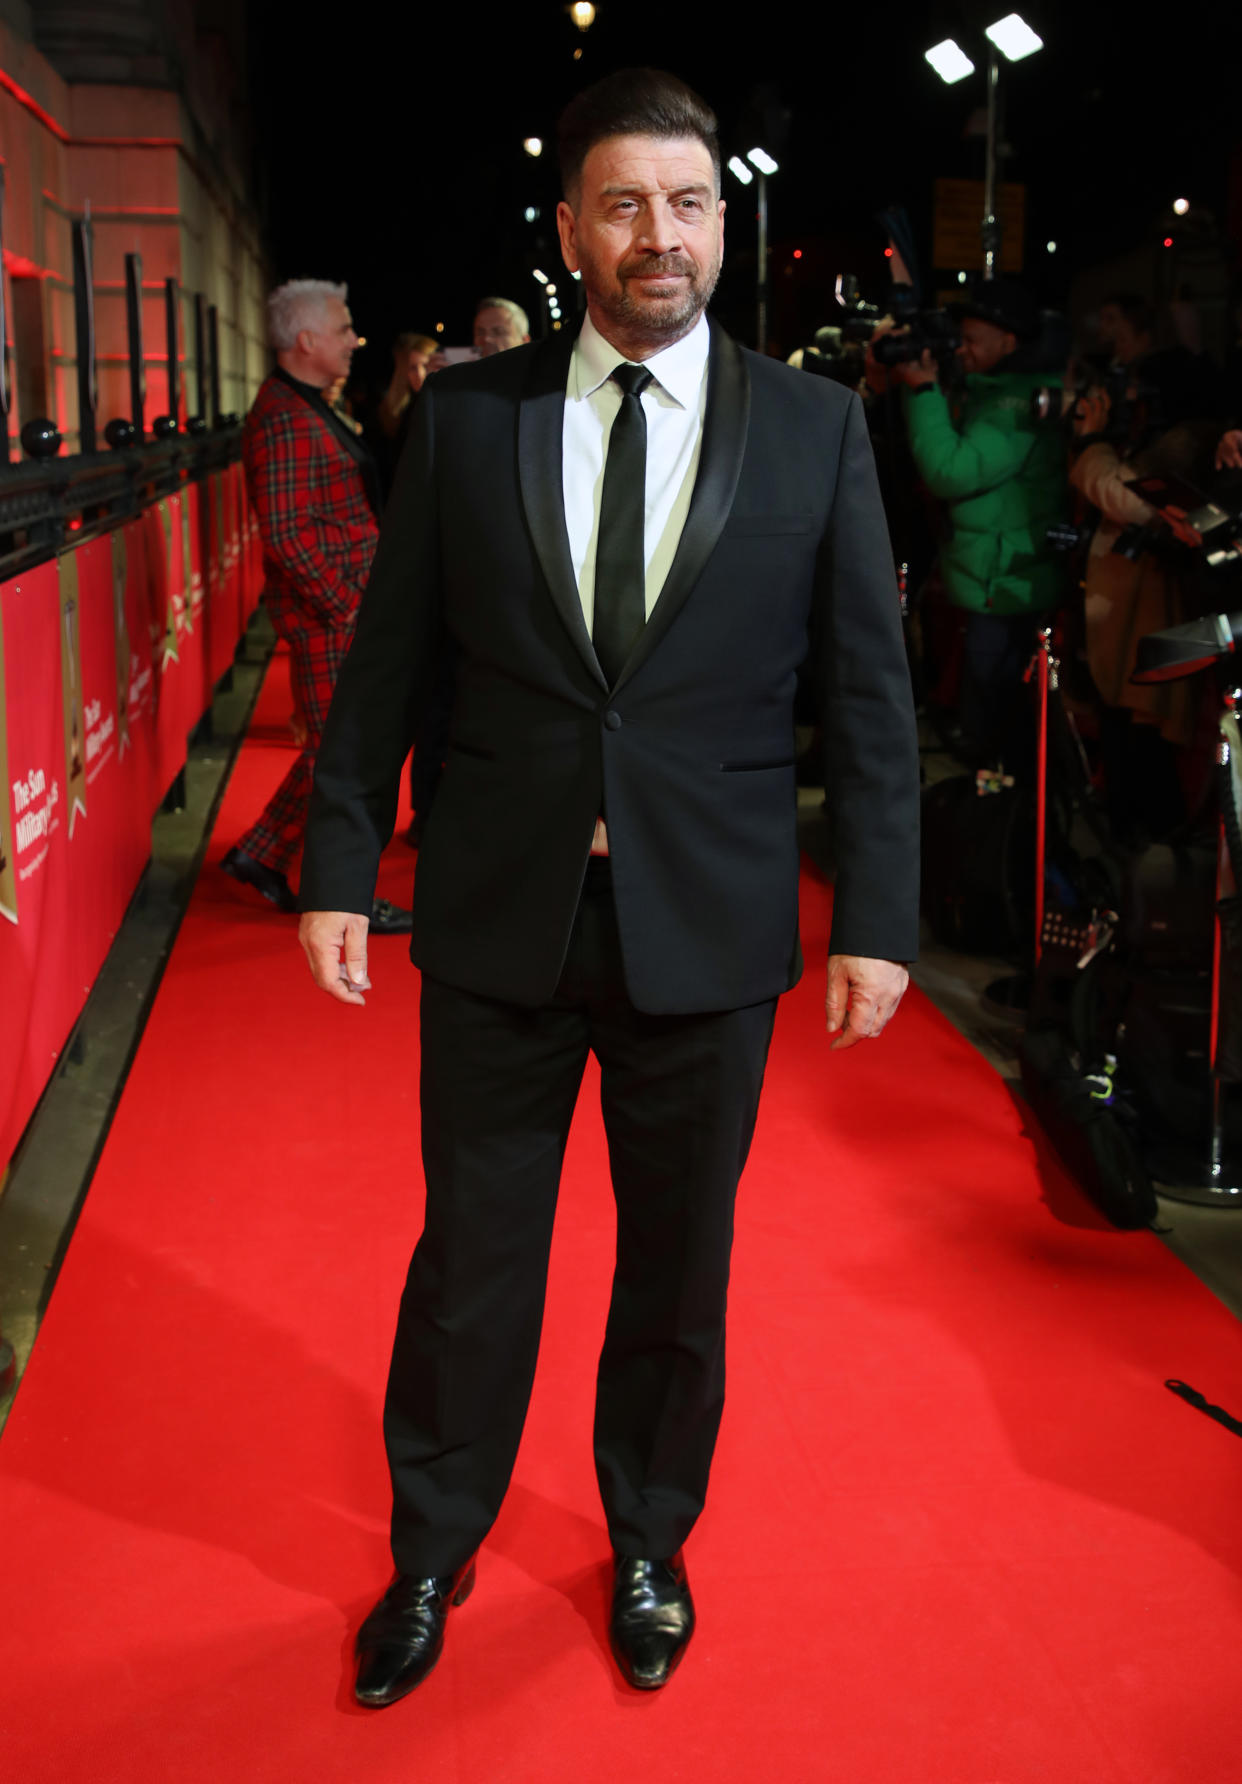 Nick Knowles attending The Sun Military Awards 2020 held at the Banqueting House, London.